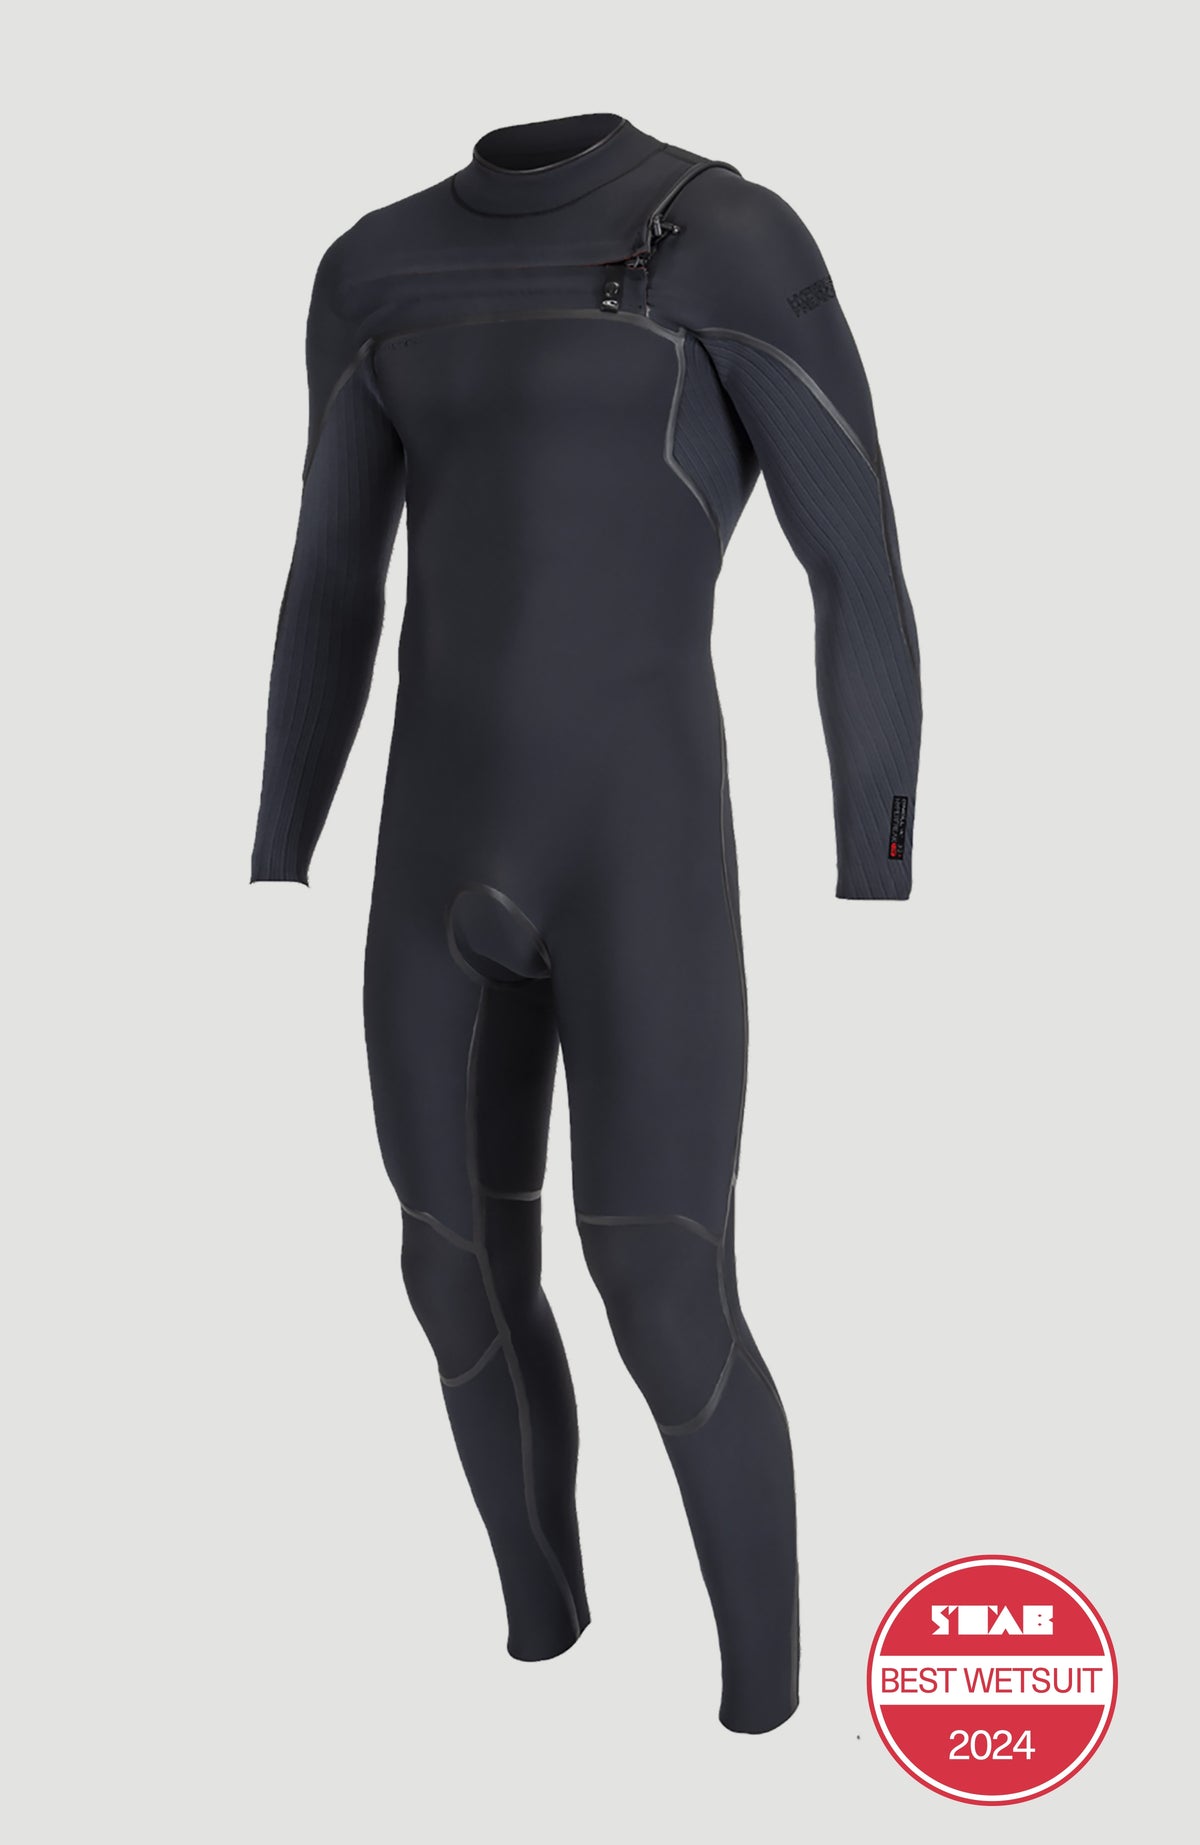 Kids Wetsuit Full Body Dive Suit Back Zip 2MM Neoprene Swimsuit for Girls  Aged 2 to 10 Year